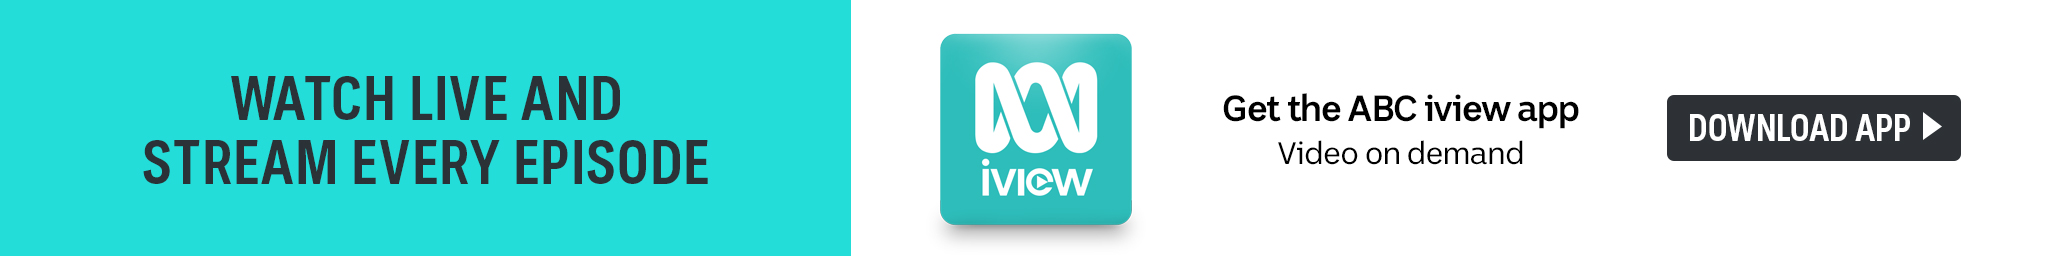 iview Insiders Program Page Teaser